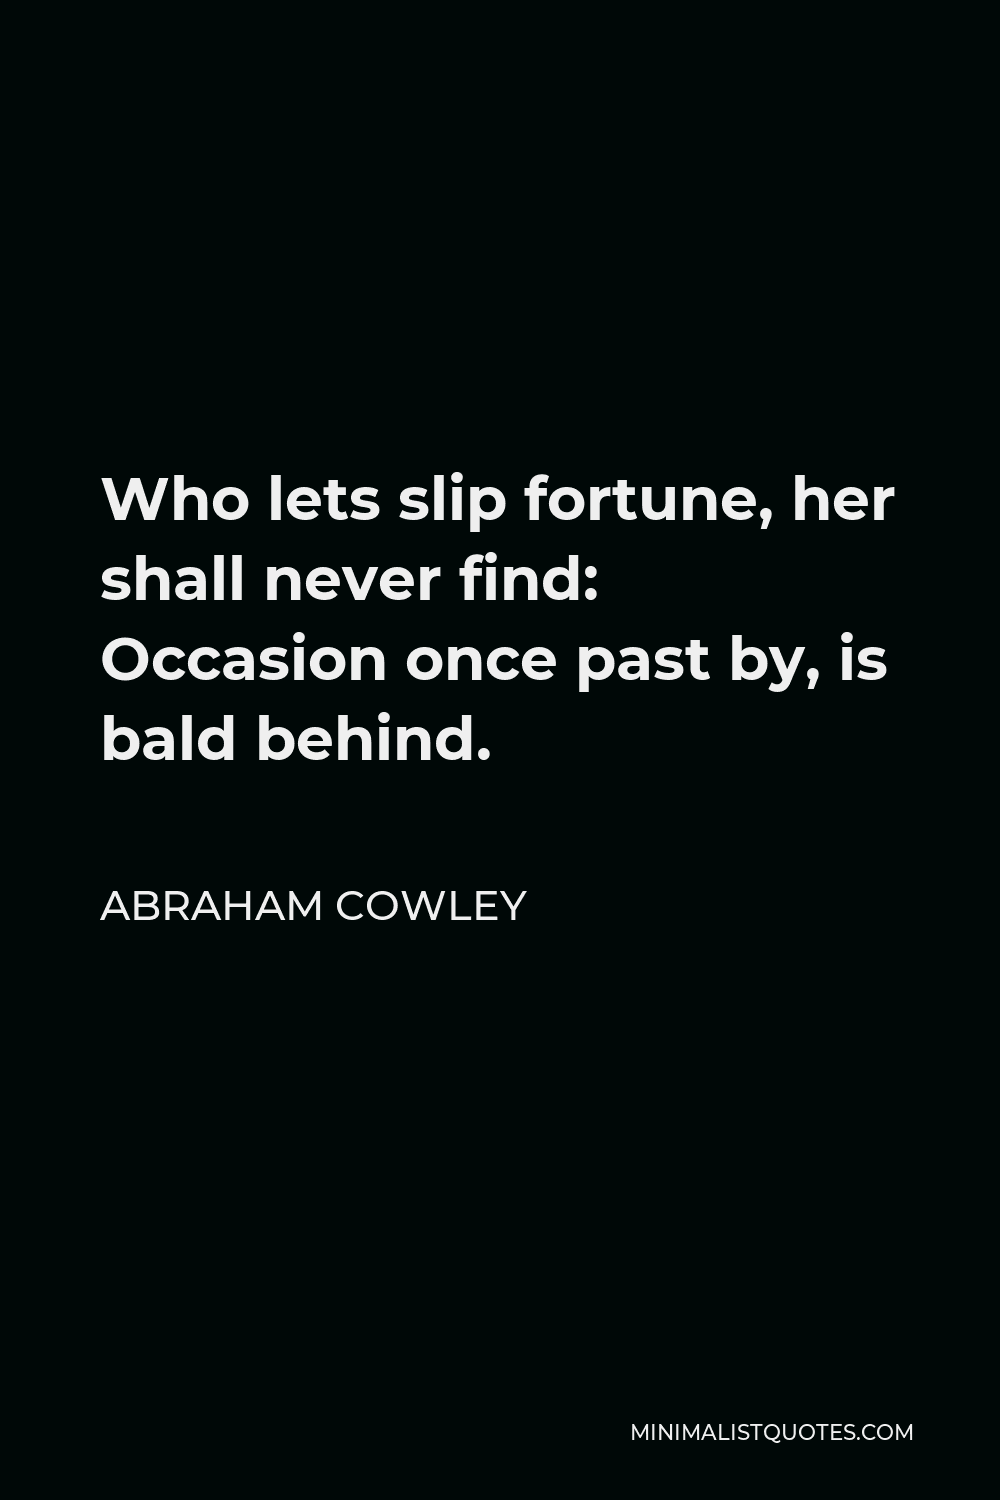 Abraham Cowley Quote - Who lets slip fortune, her shall never find: Occasion once past by, is bald behind.